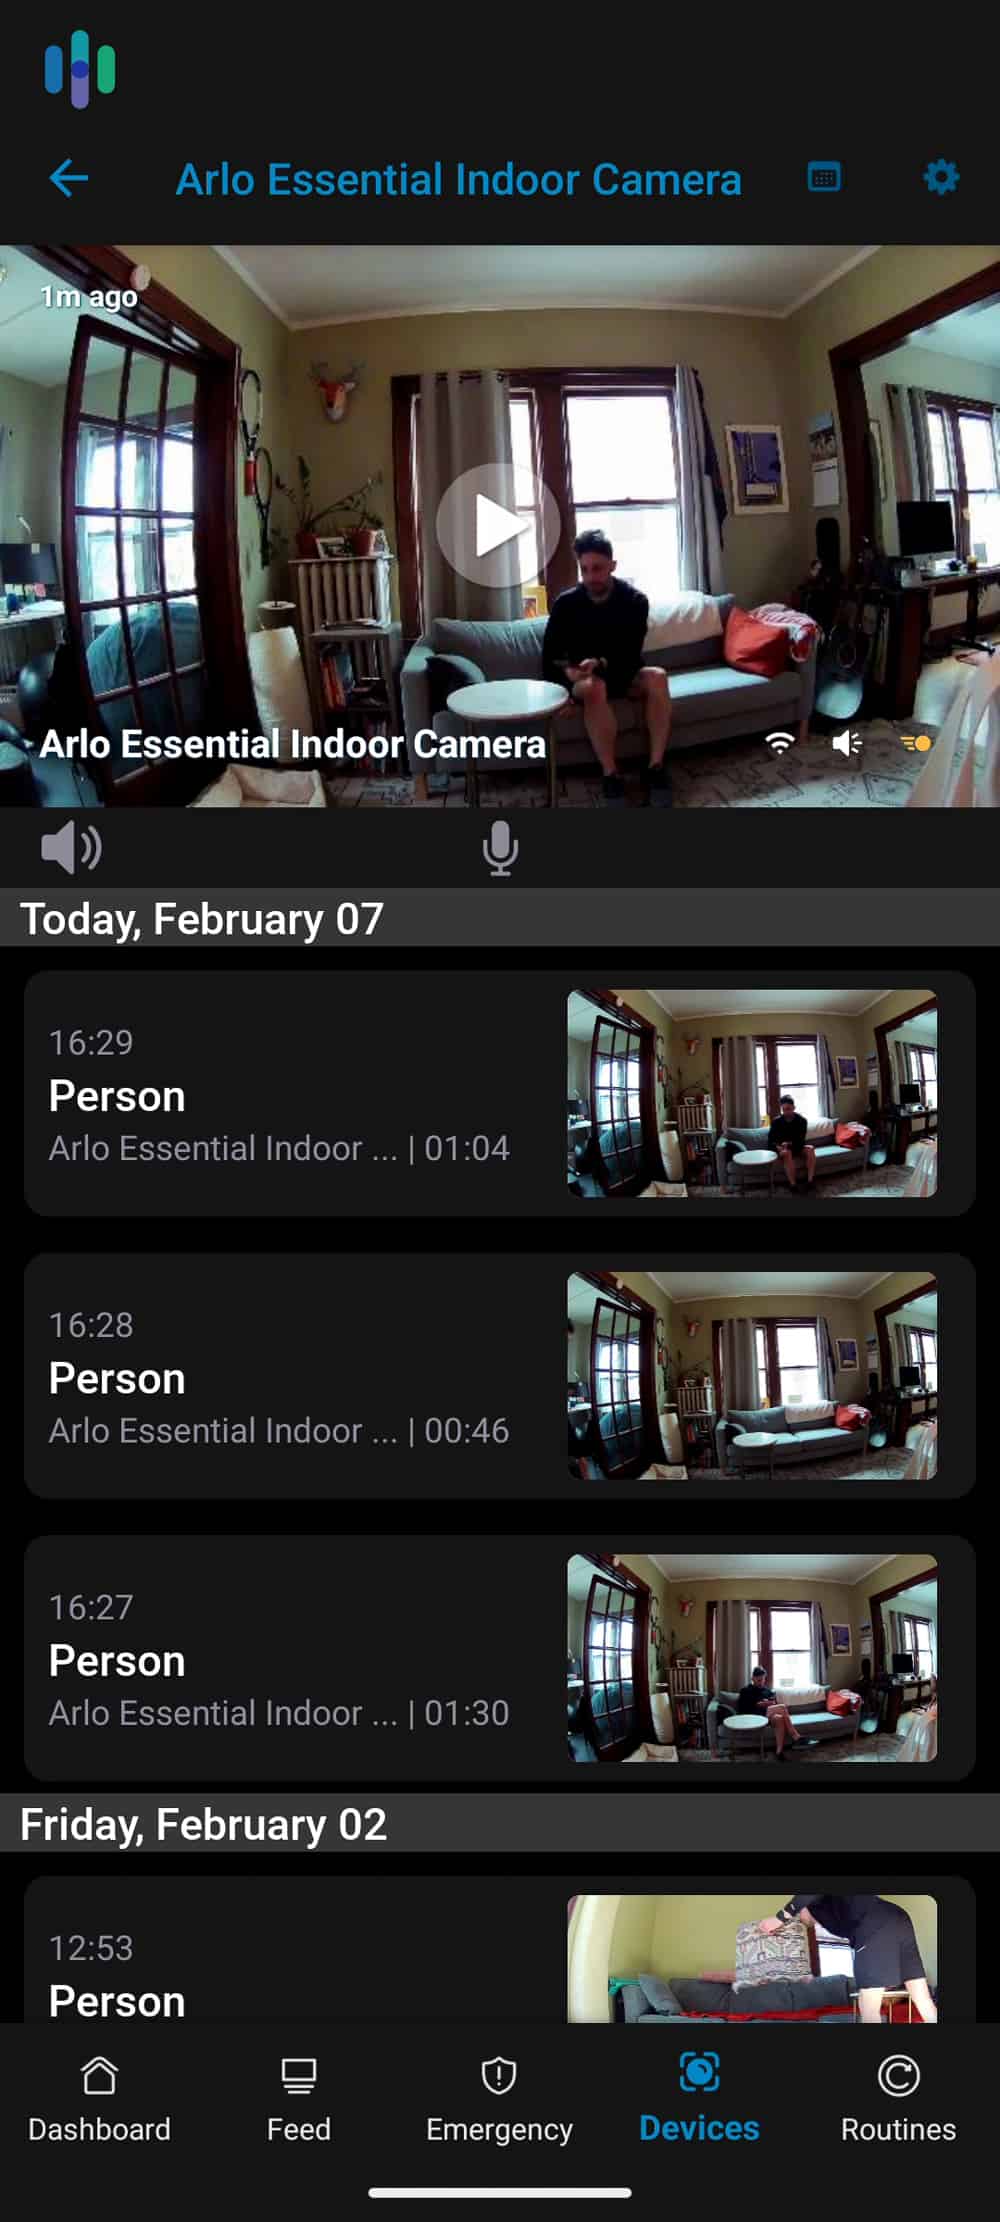 Devices view on the Arlo Secure app